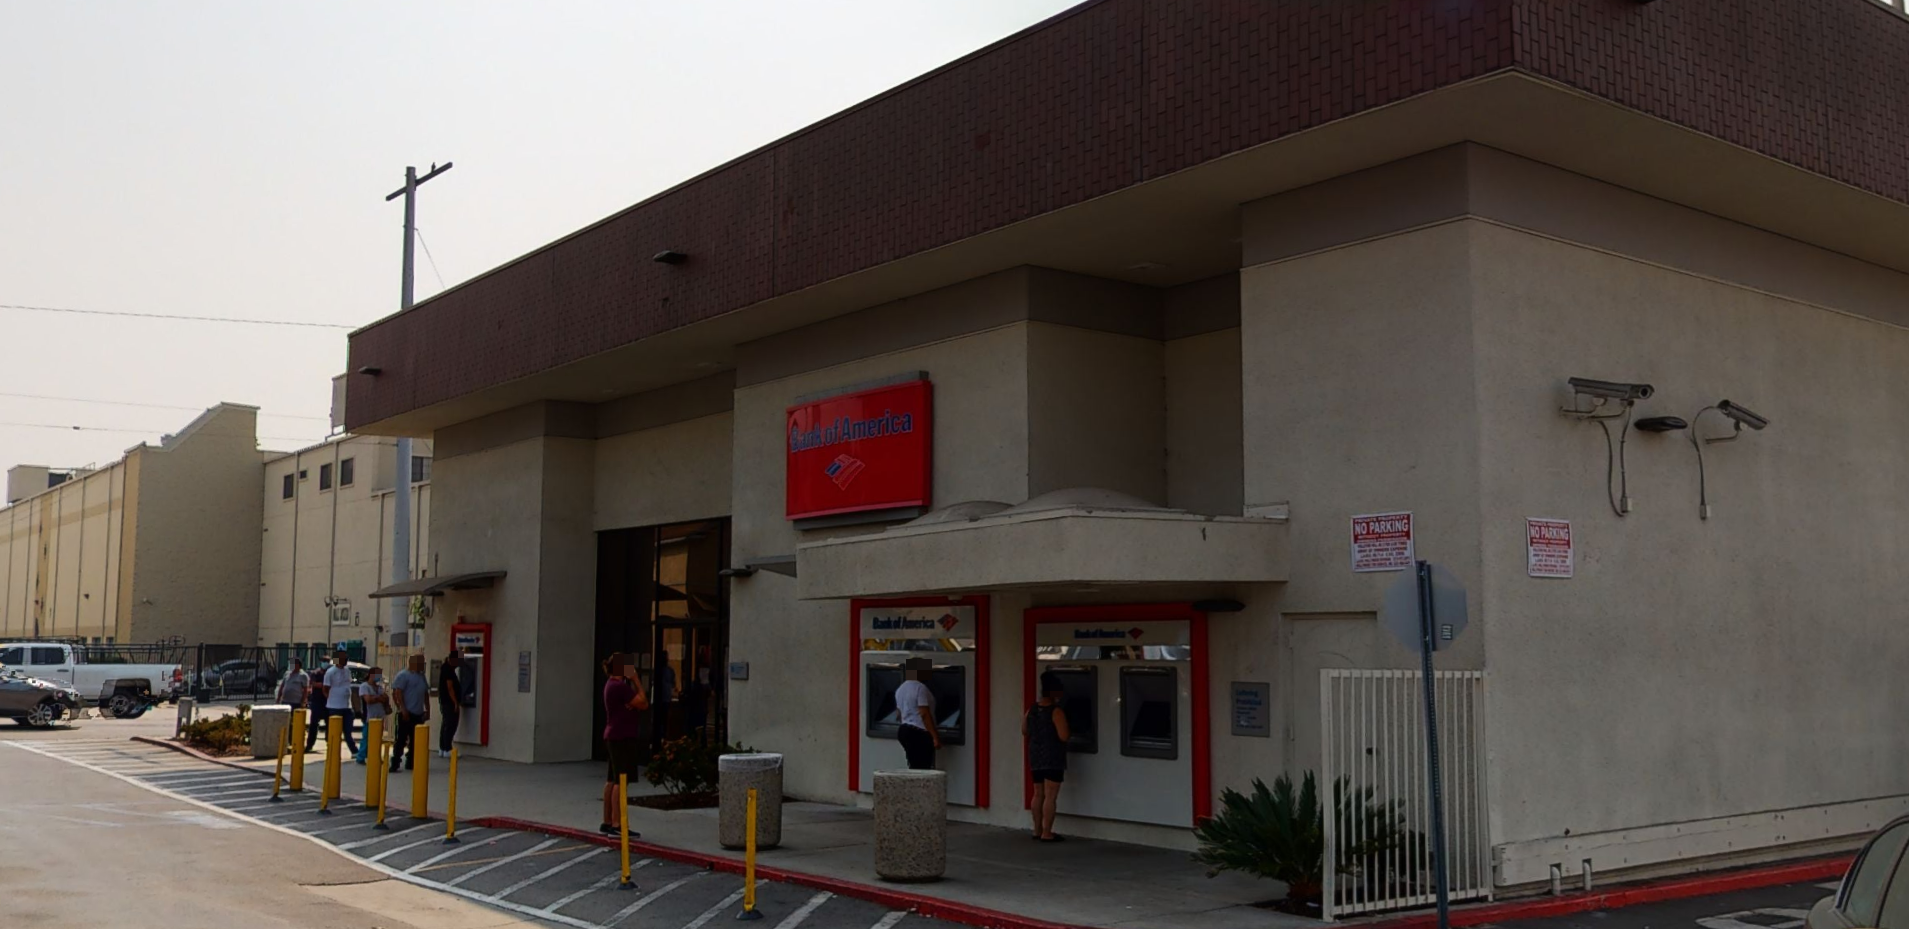 Bank of America financial center with walk-up ATM | 4975 Melrose Ave, Hollywood, CA 90029